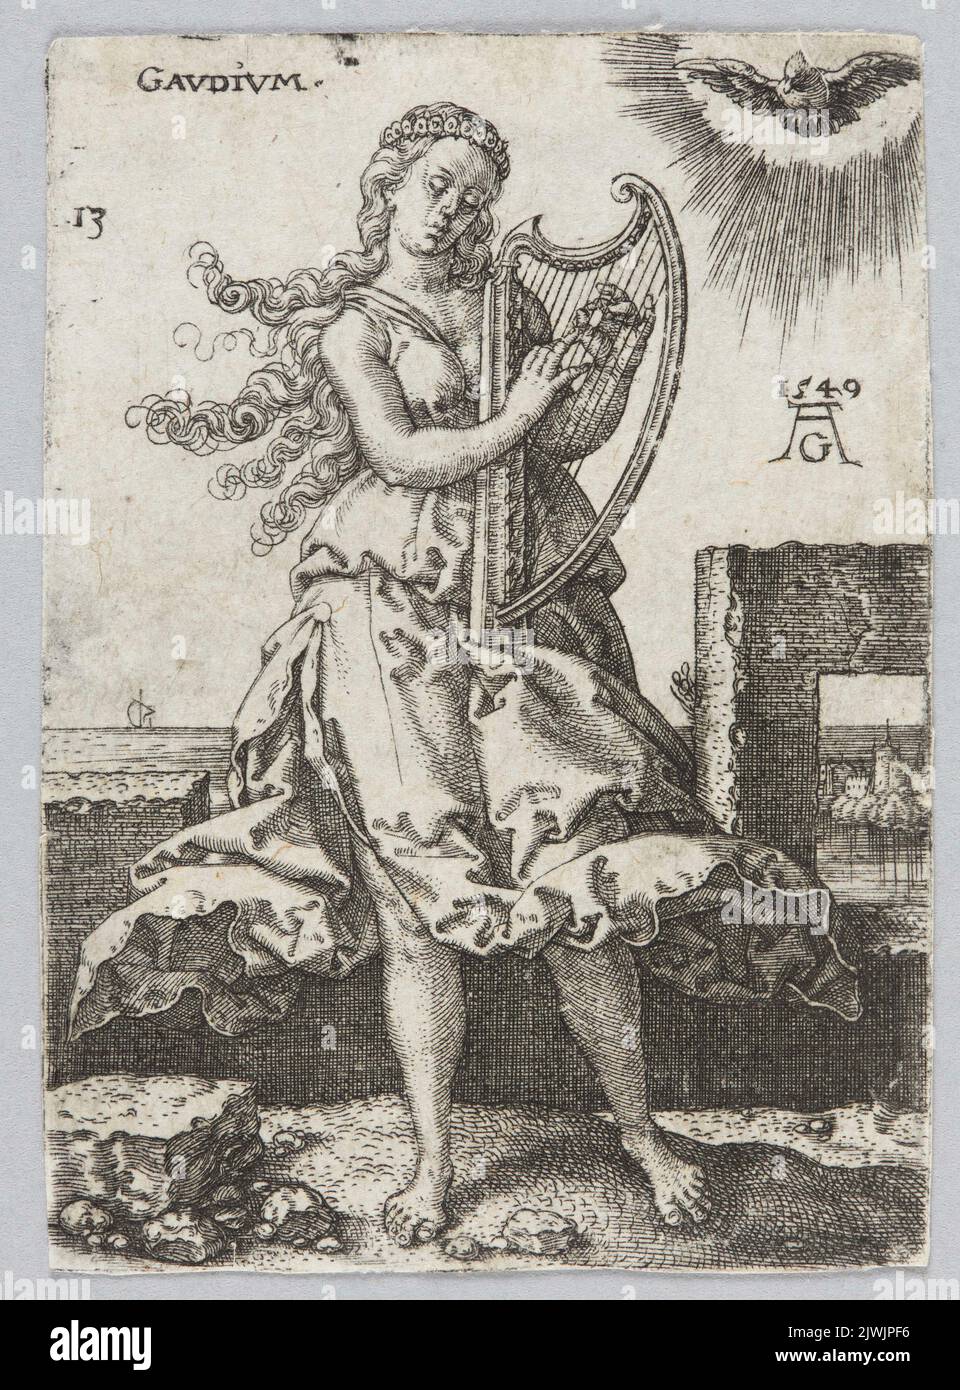 Gaudium, from the cycle: Allegorical figures. Aldegrever, Heinrich (1502-1555/1561), graphic artist Stock Photo